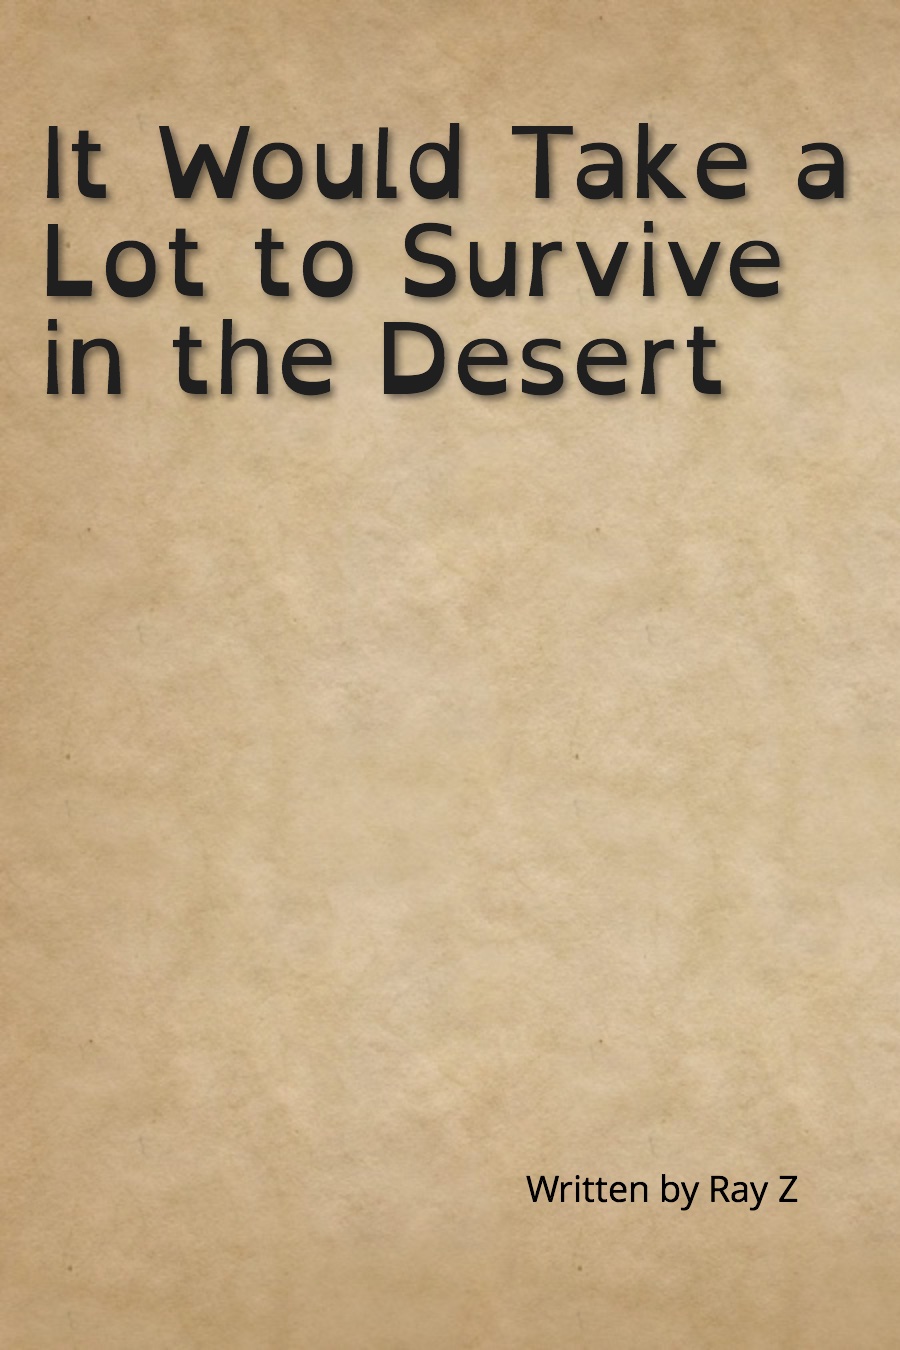 It Would Take a Lot to Survive in the Desert by Ray Z